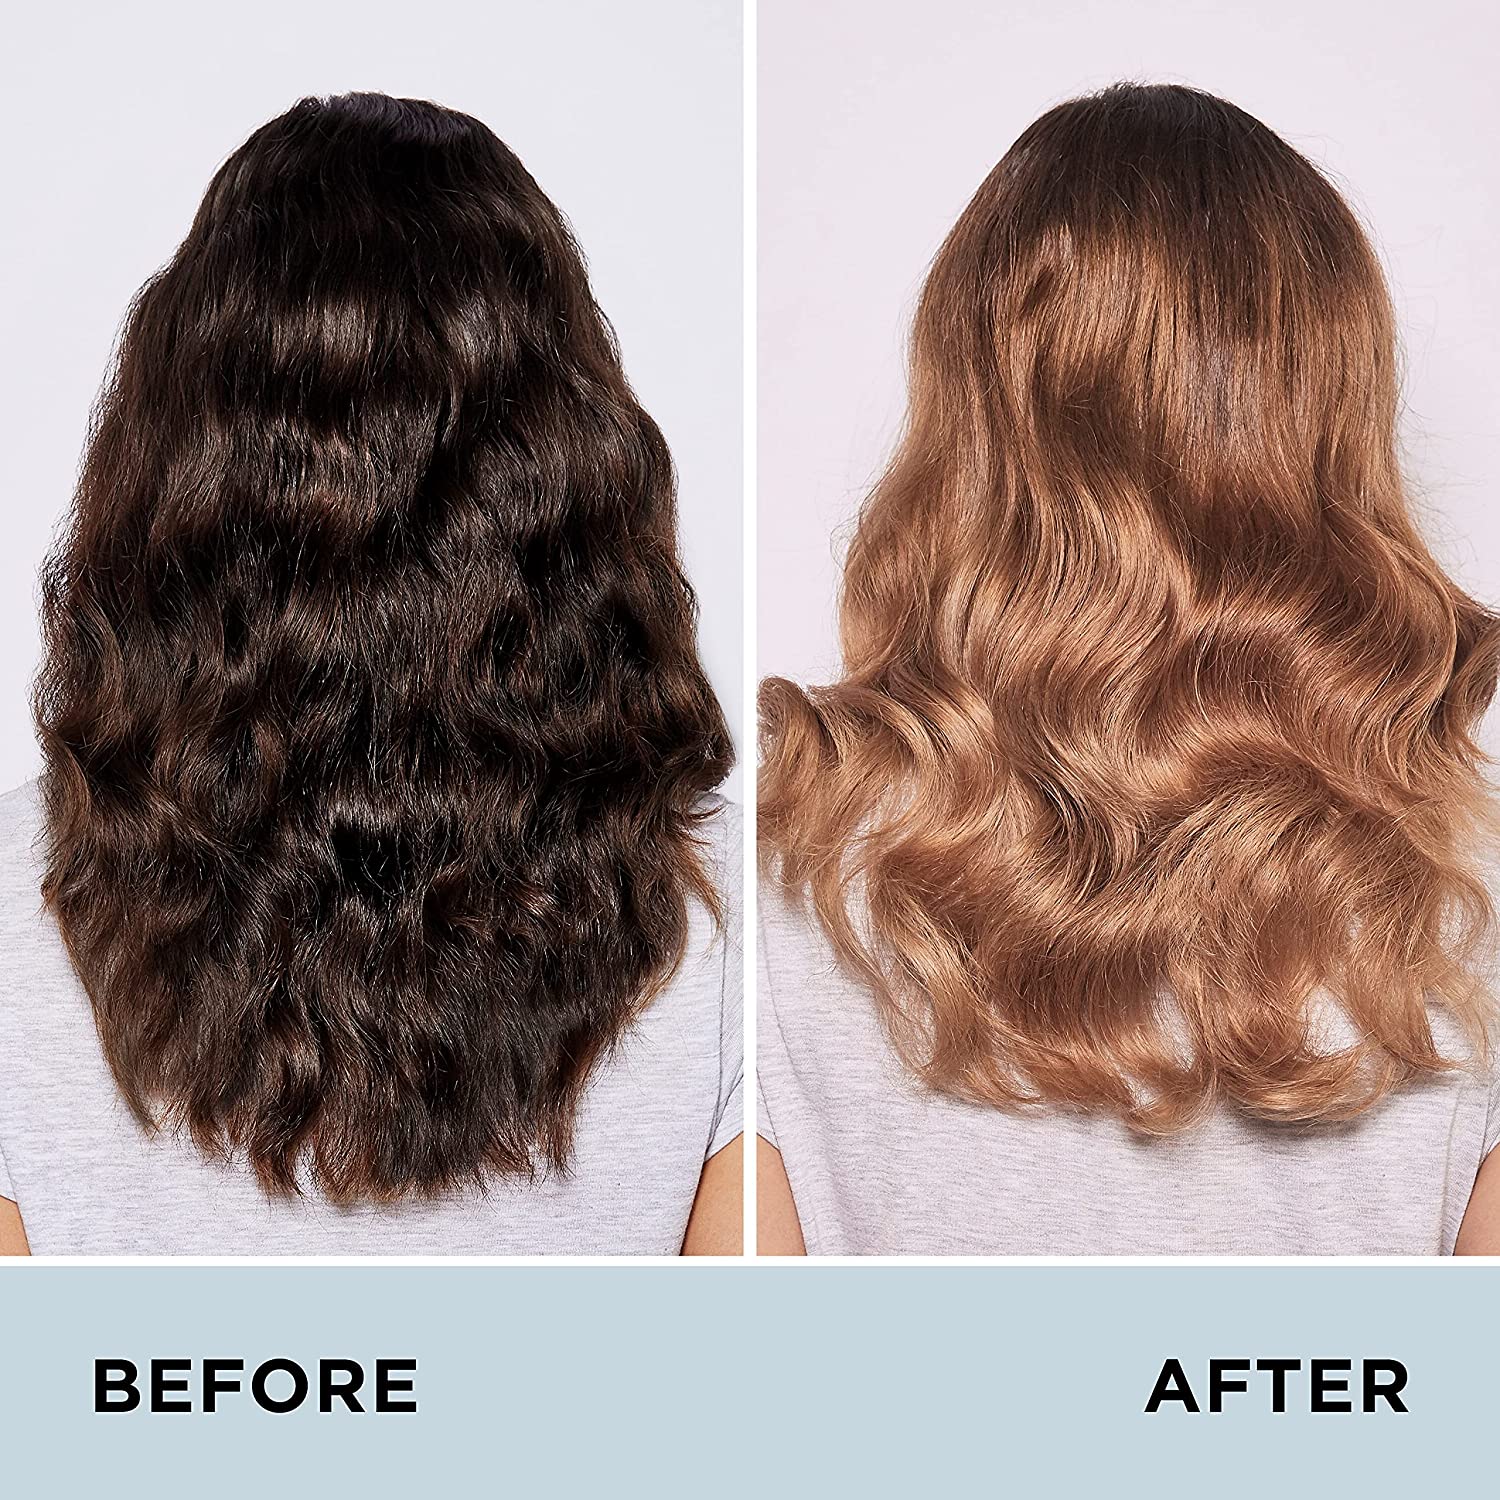 Clairol Professional Kaleidocolors, Neutral, 1 oz Find Your New Look Today!